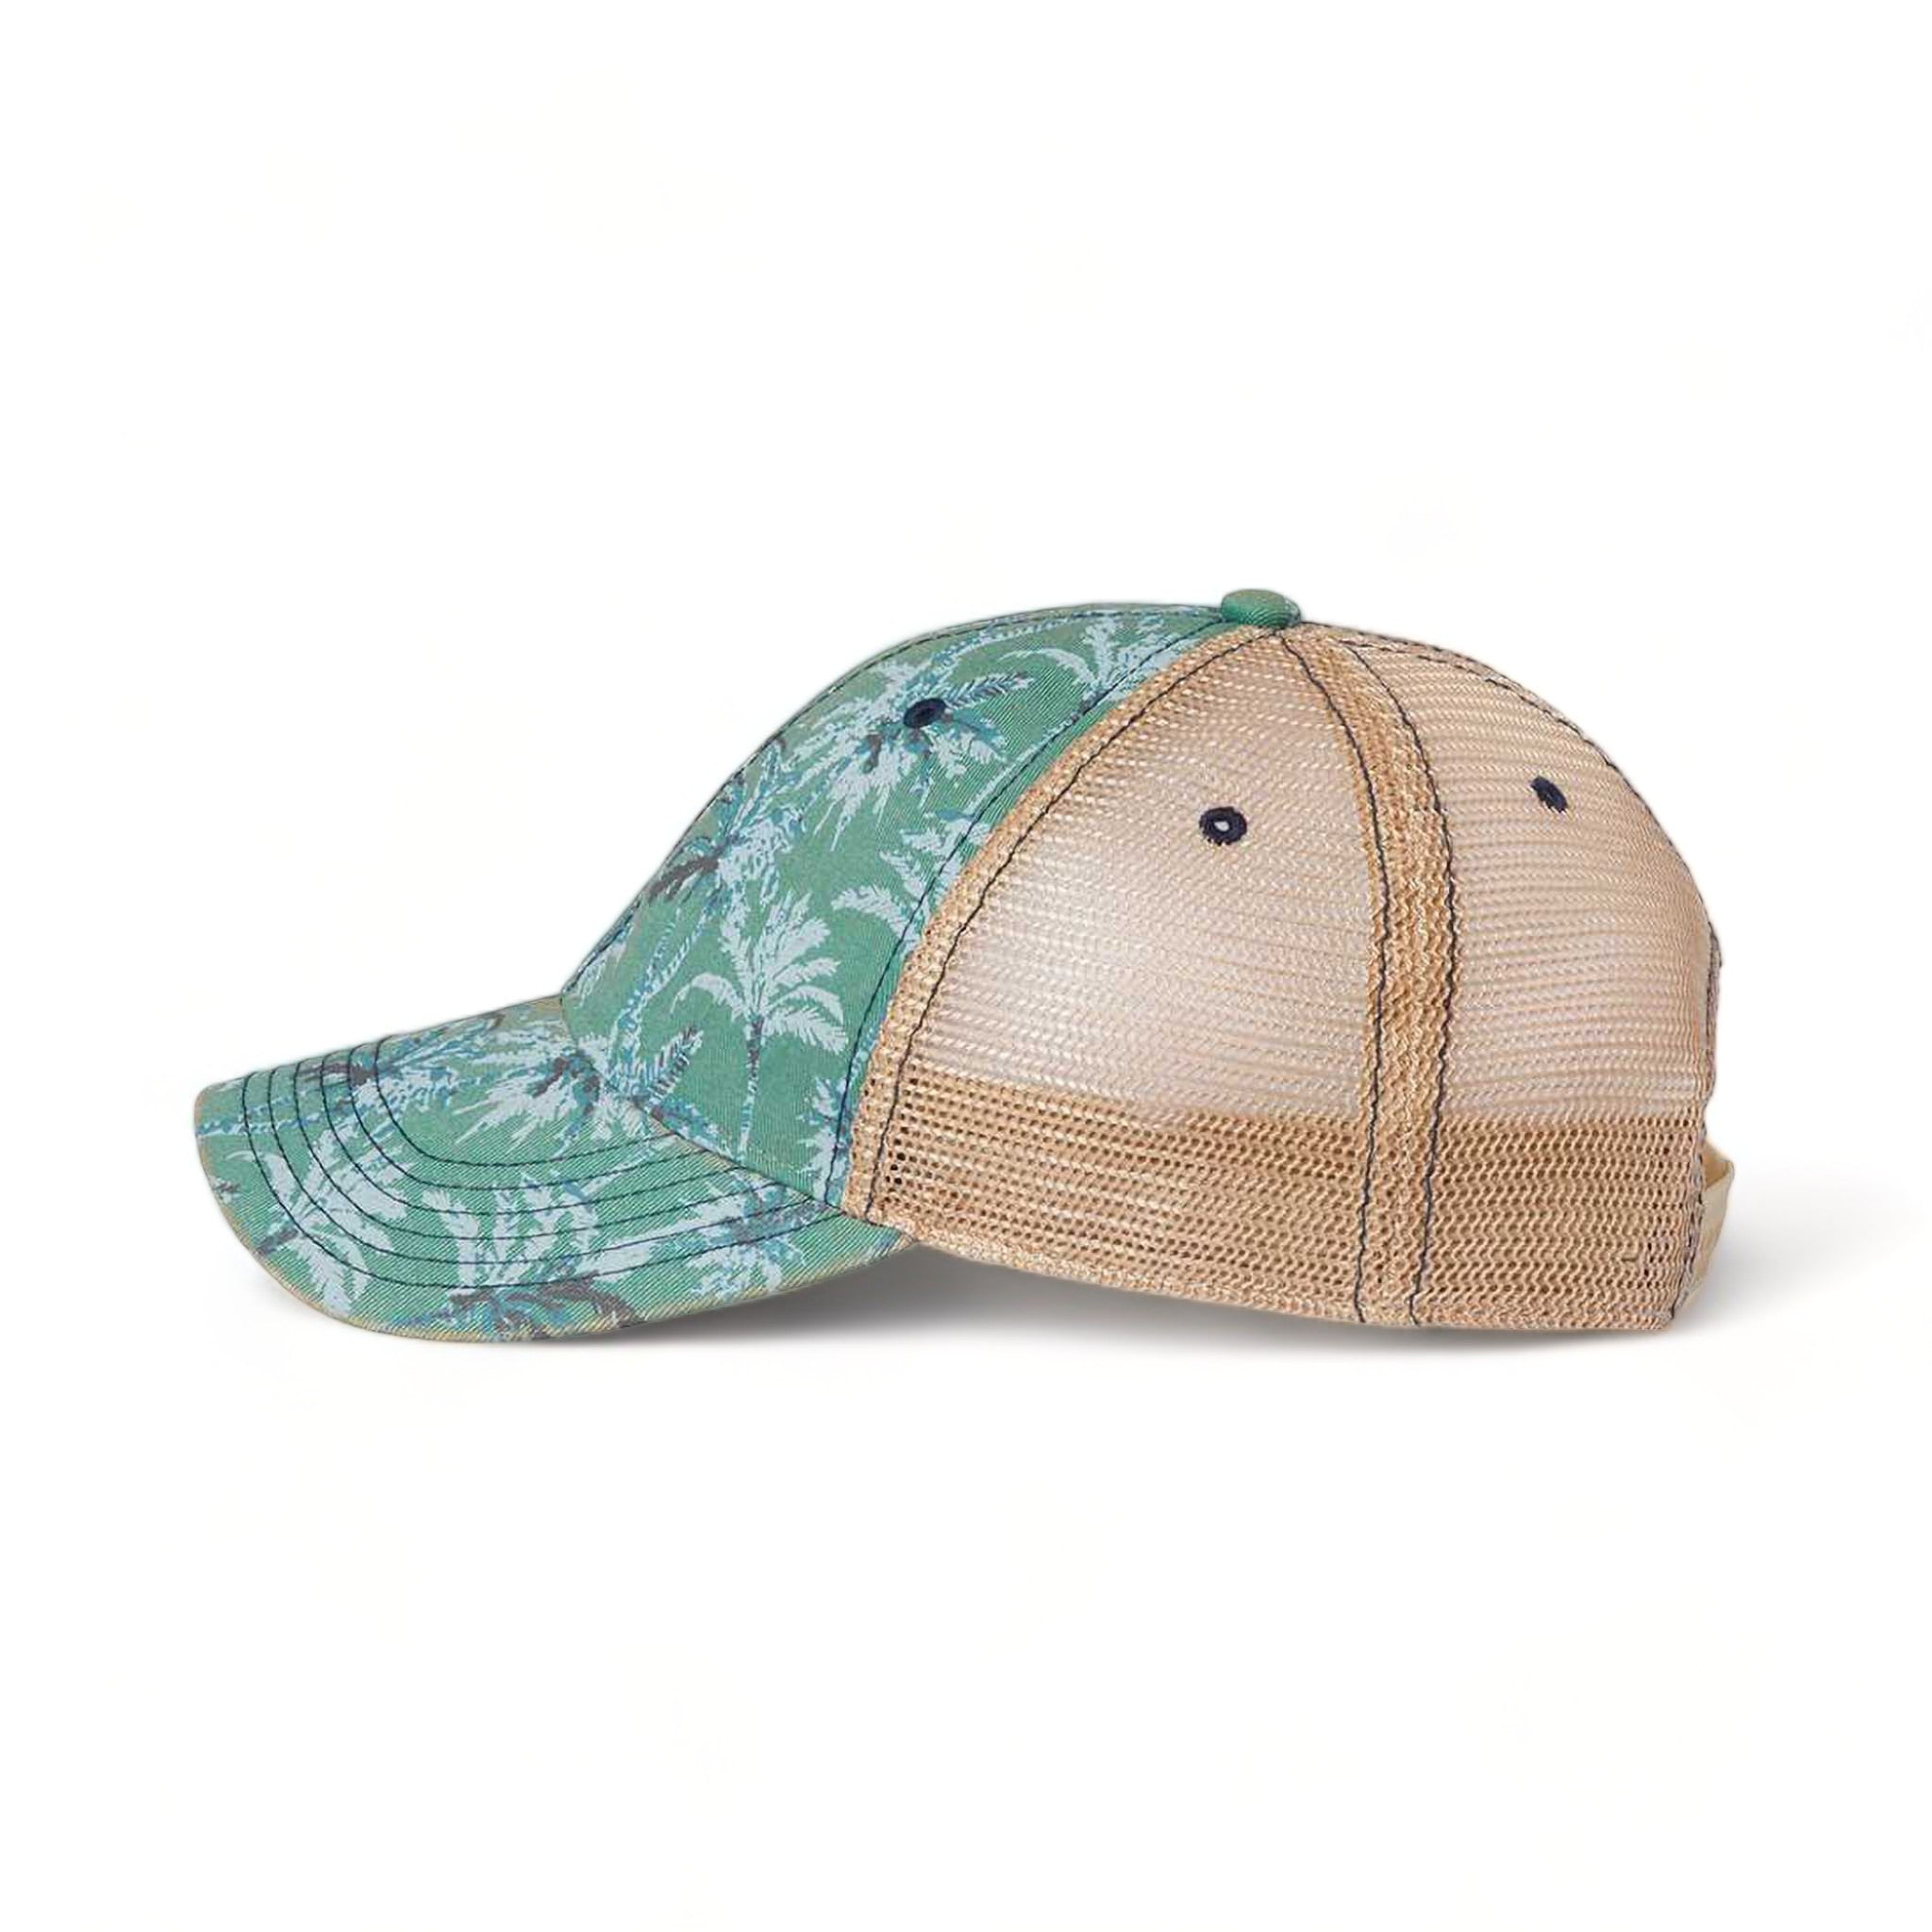 Side view of LEGACY OFA custom hat in green palm and khaki